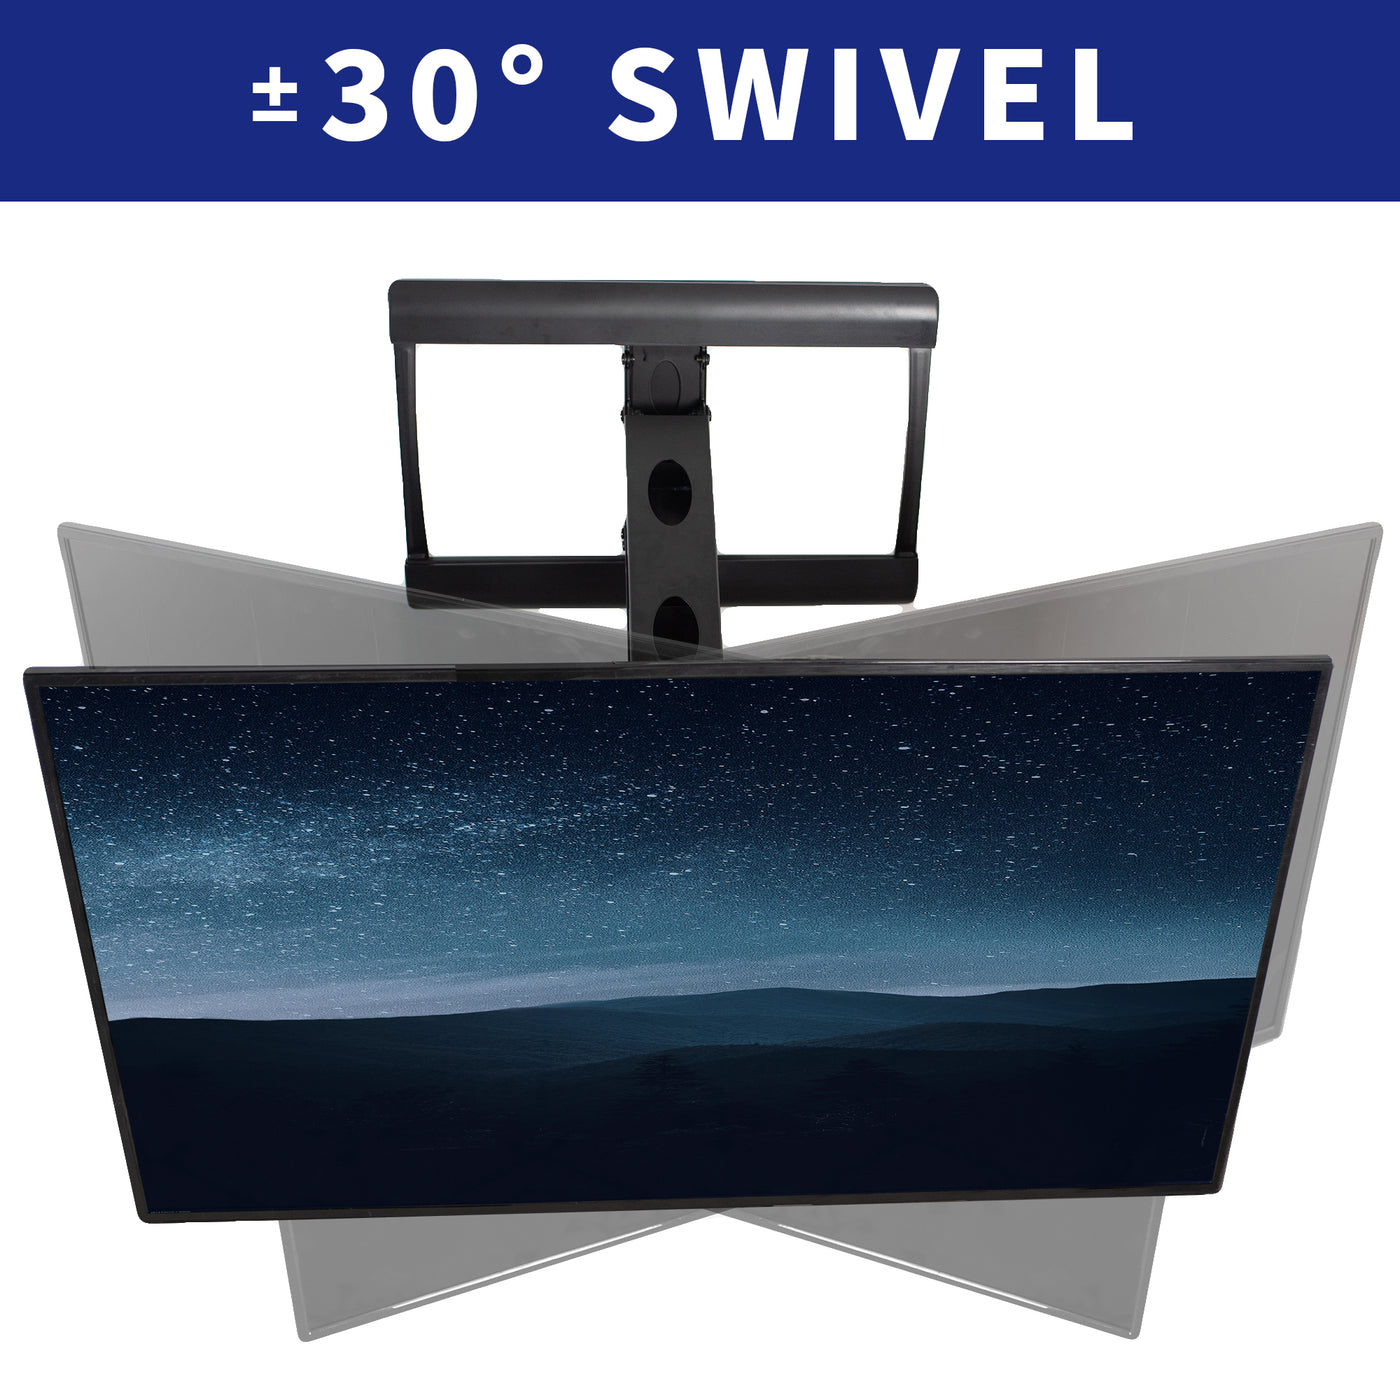 Included swivel for more comfortable viewing angles.